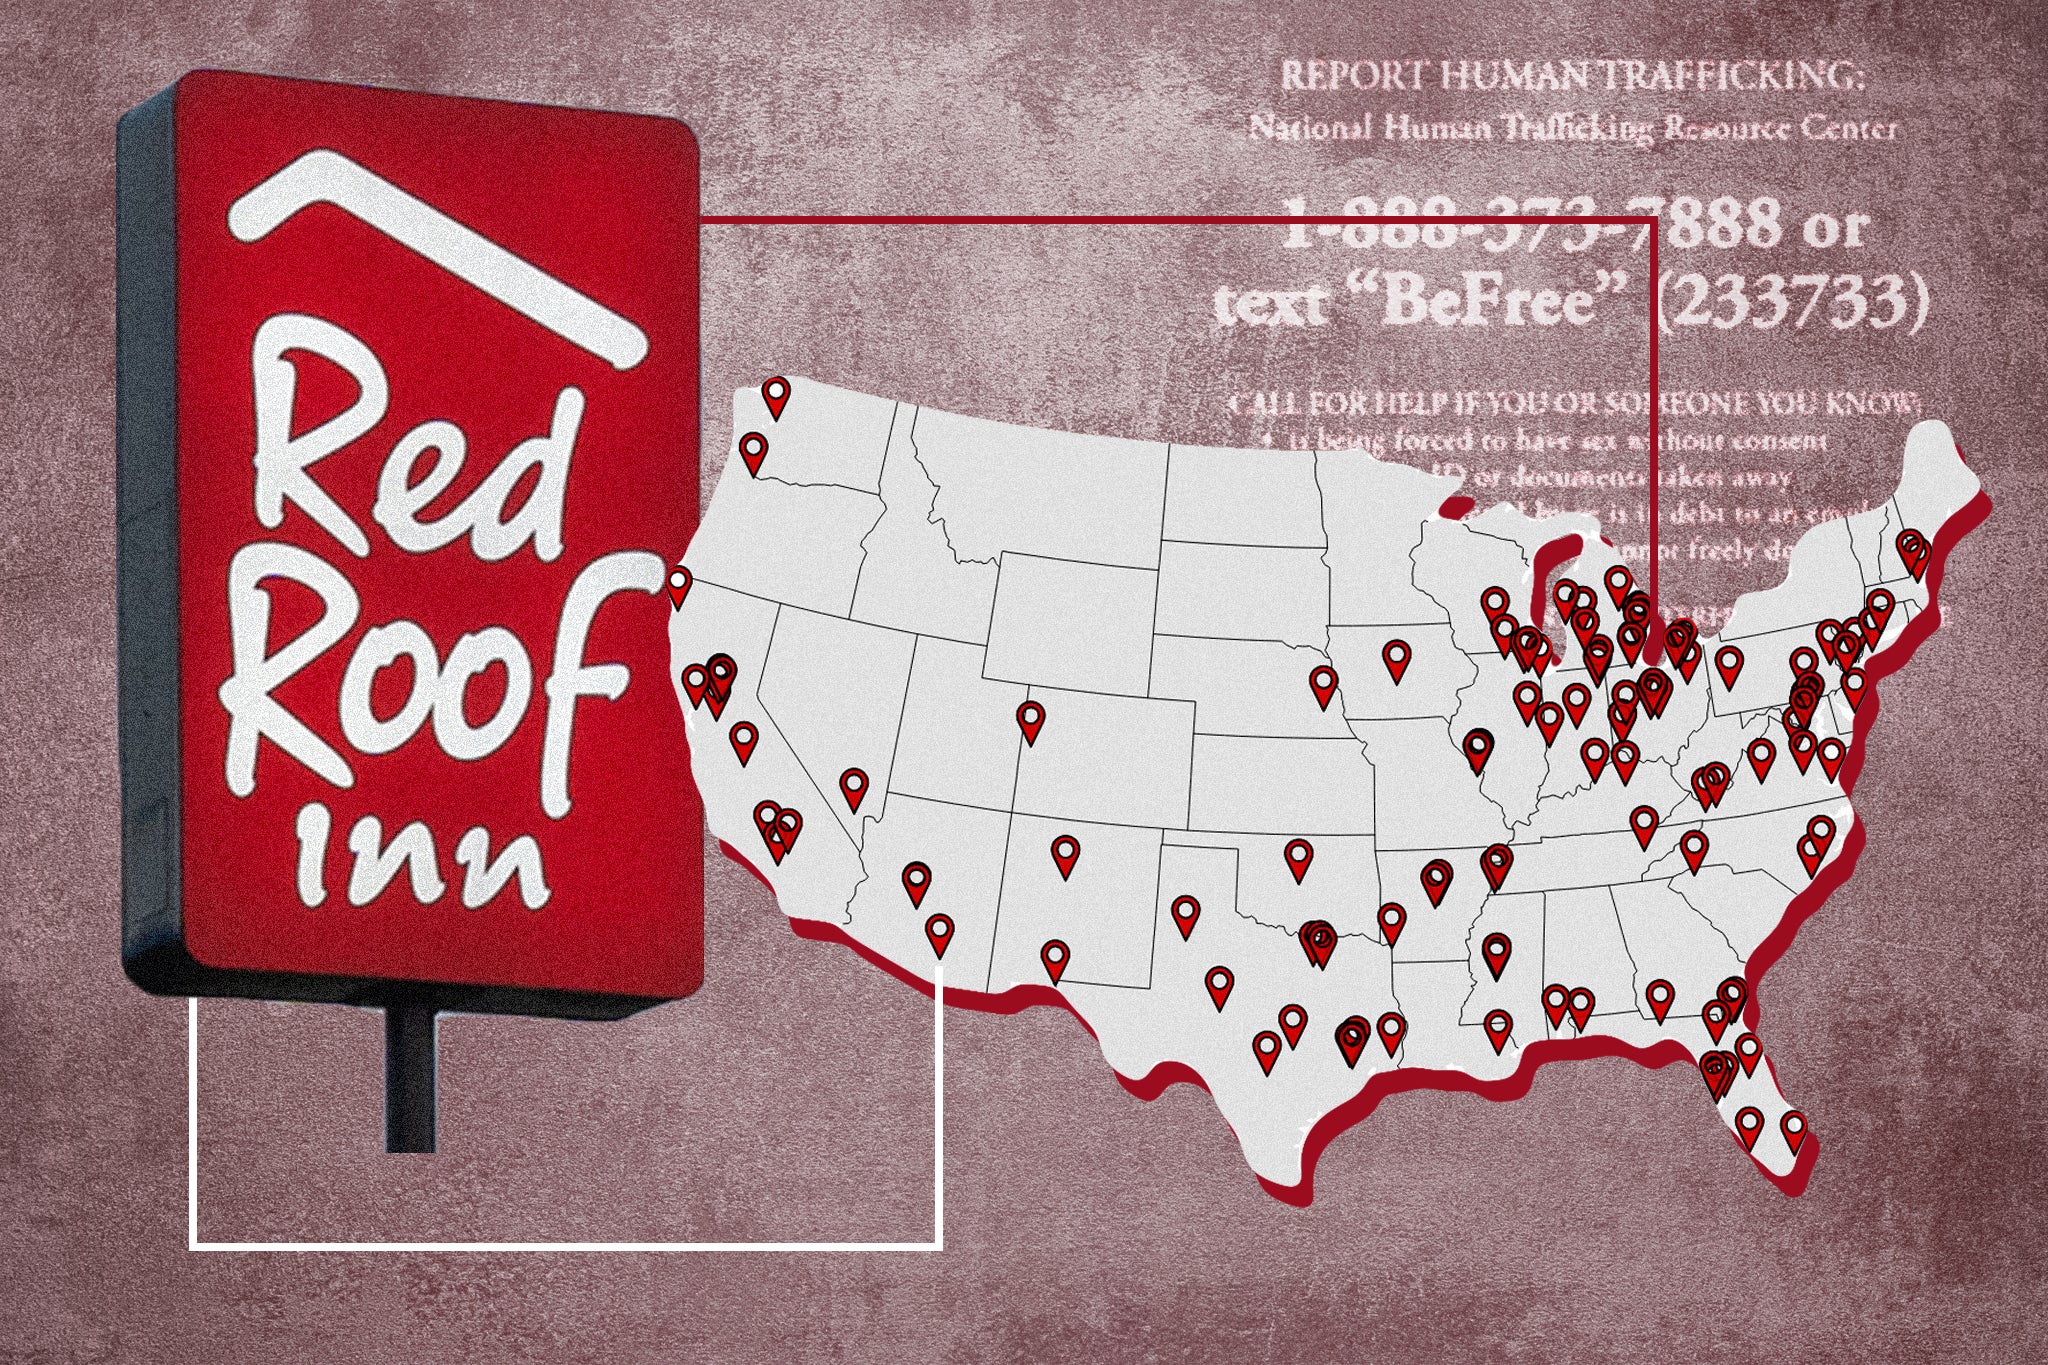 Sex trafficking victims have named 115 different Red Roof Inn locations across 39 states as locations where they were allegedly trafficked.